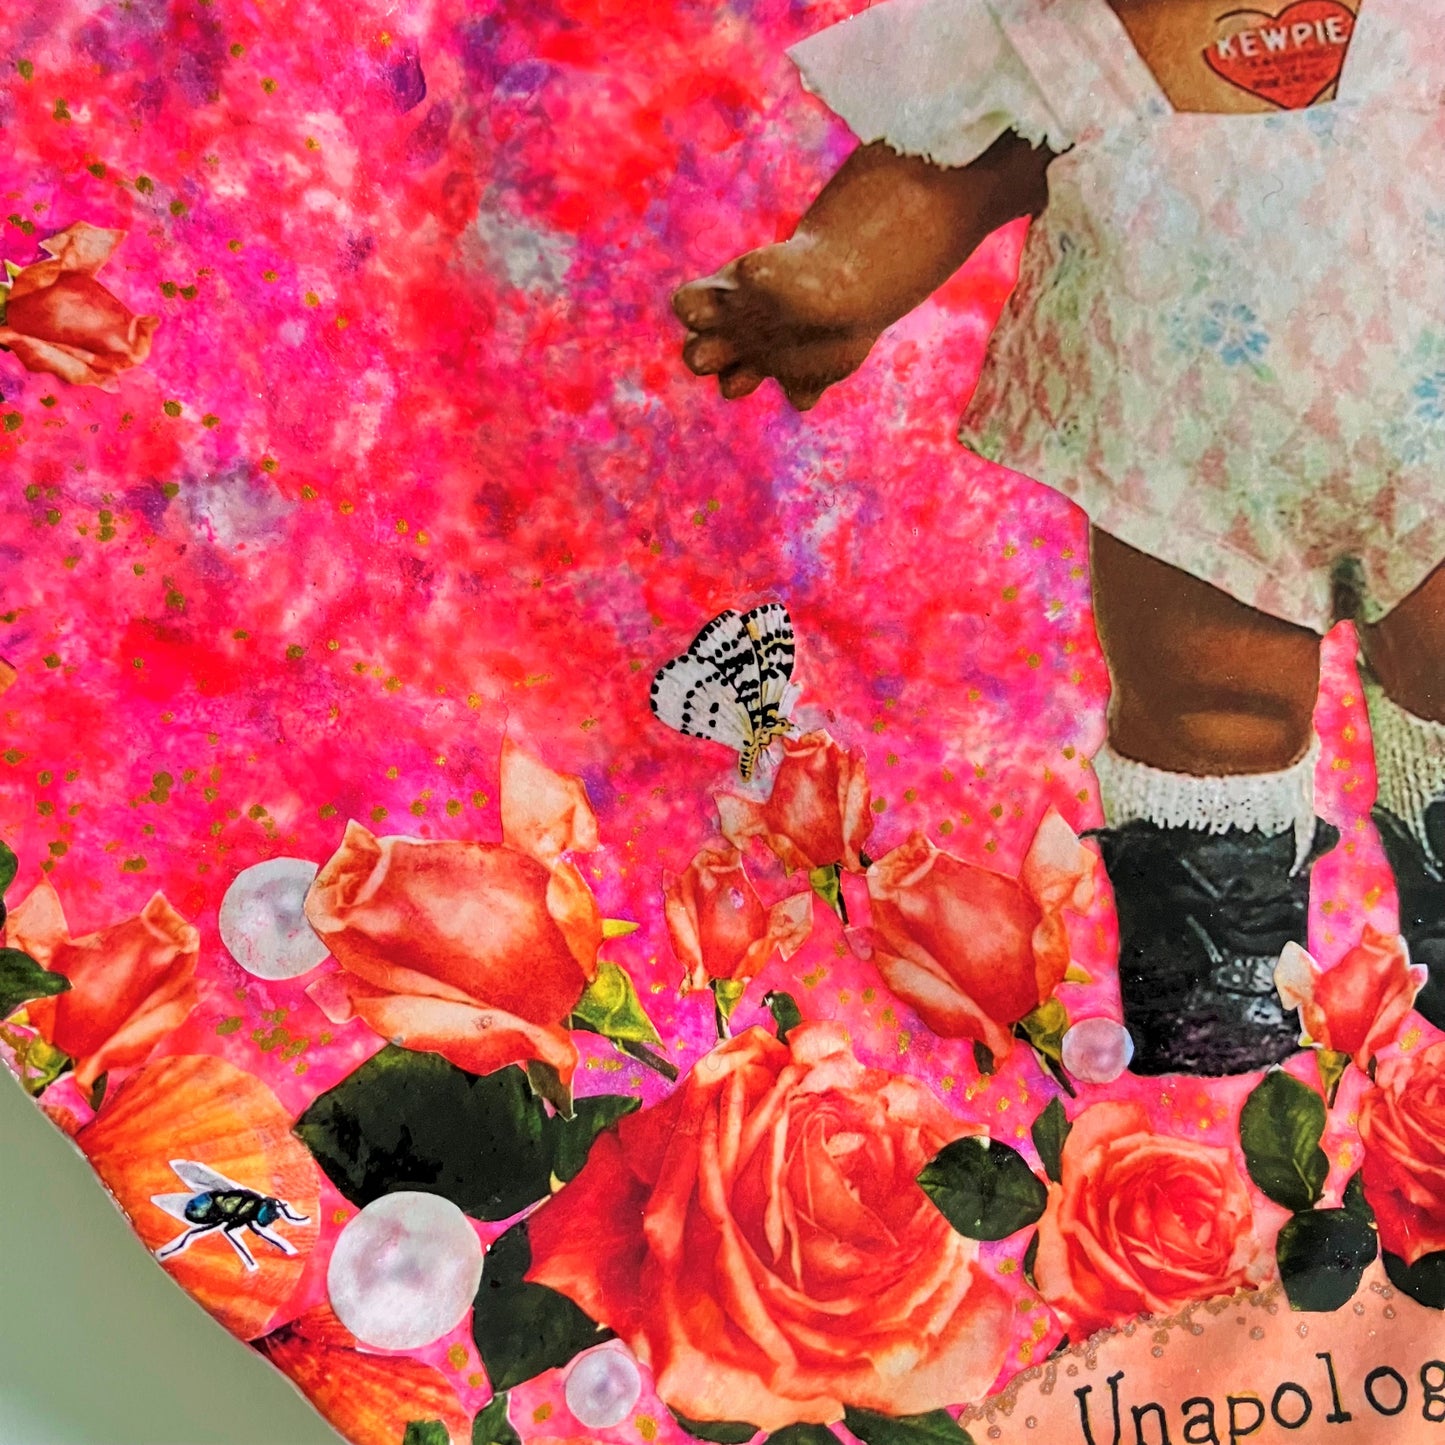 "Unapologetically Myself" Wall Plate by House of Frisson, featuring a vintage black doll surrounded by roses , pearls, moths, and a lizard, framed by shells, on a pink background. Showing closeup details of the roses, pearls, and moths.